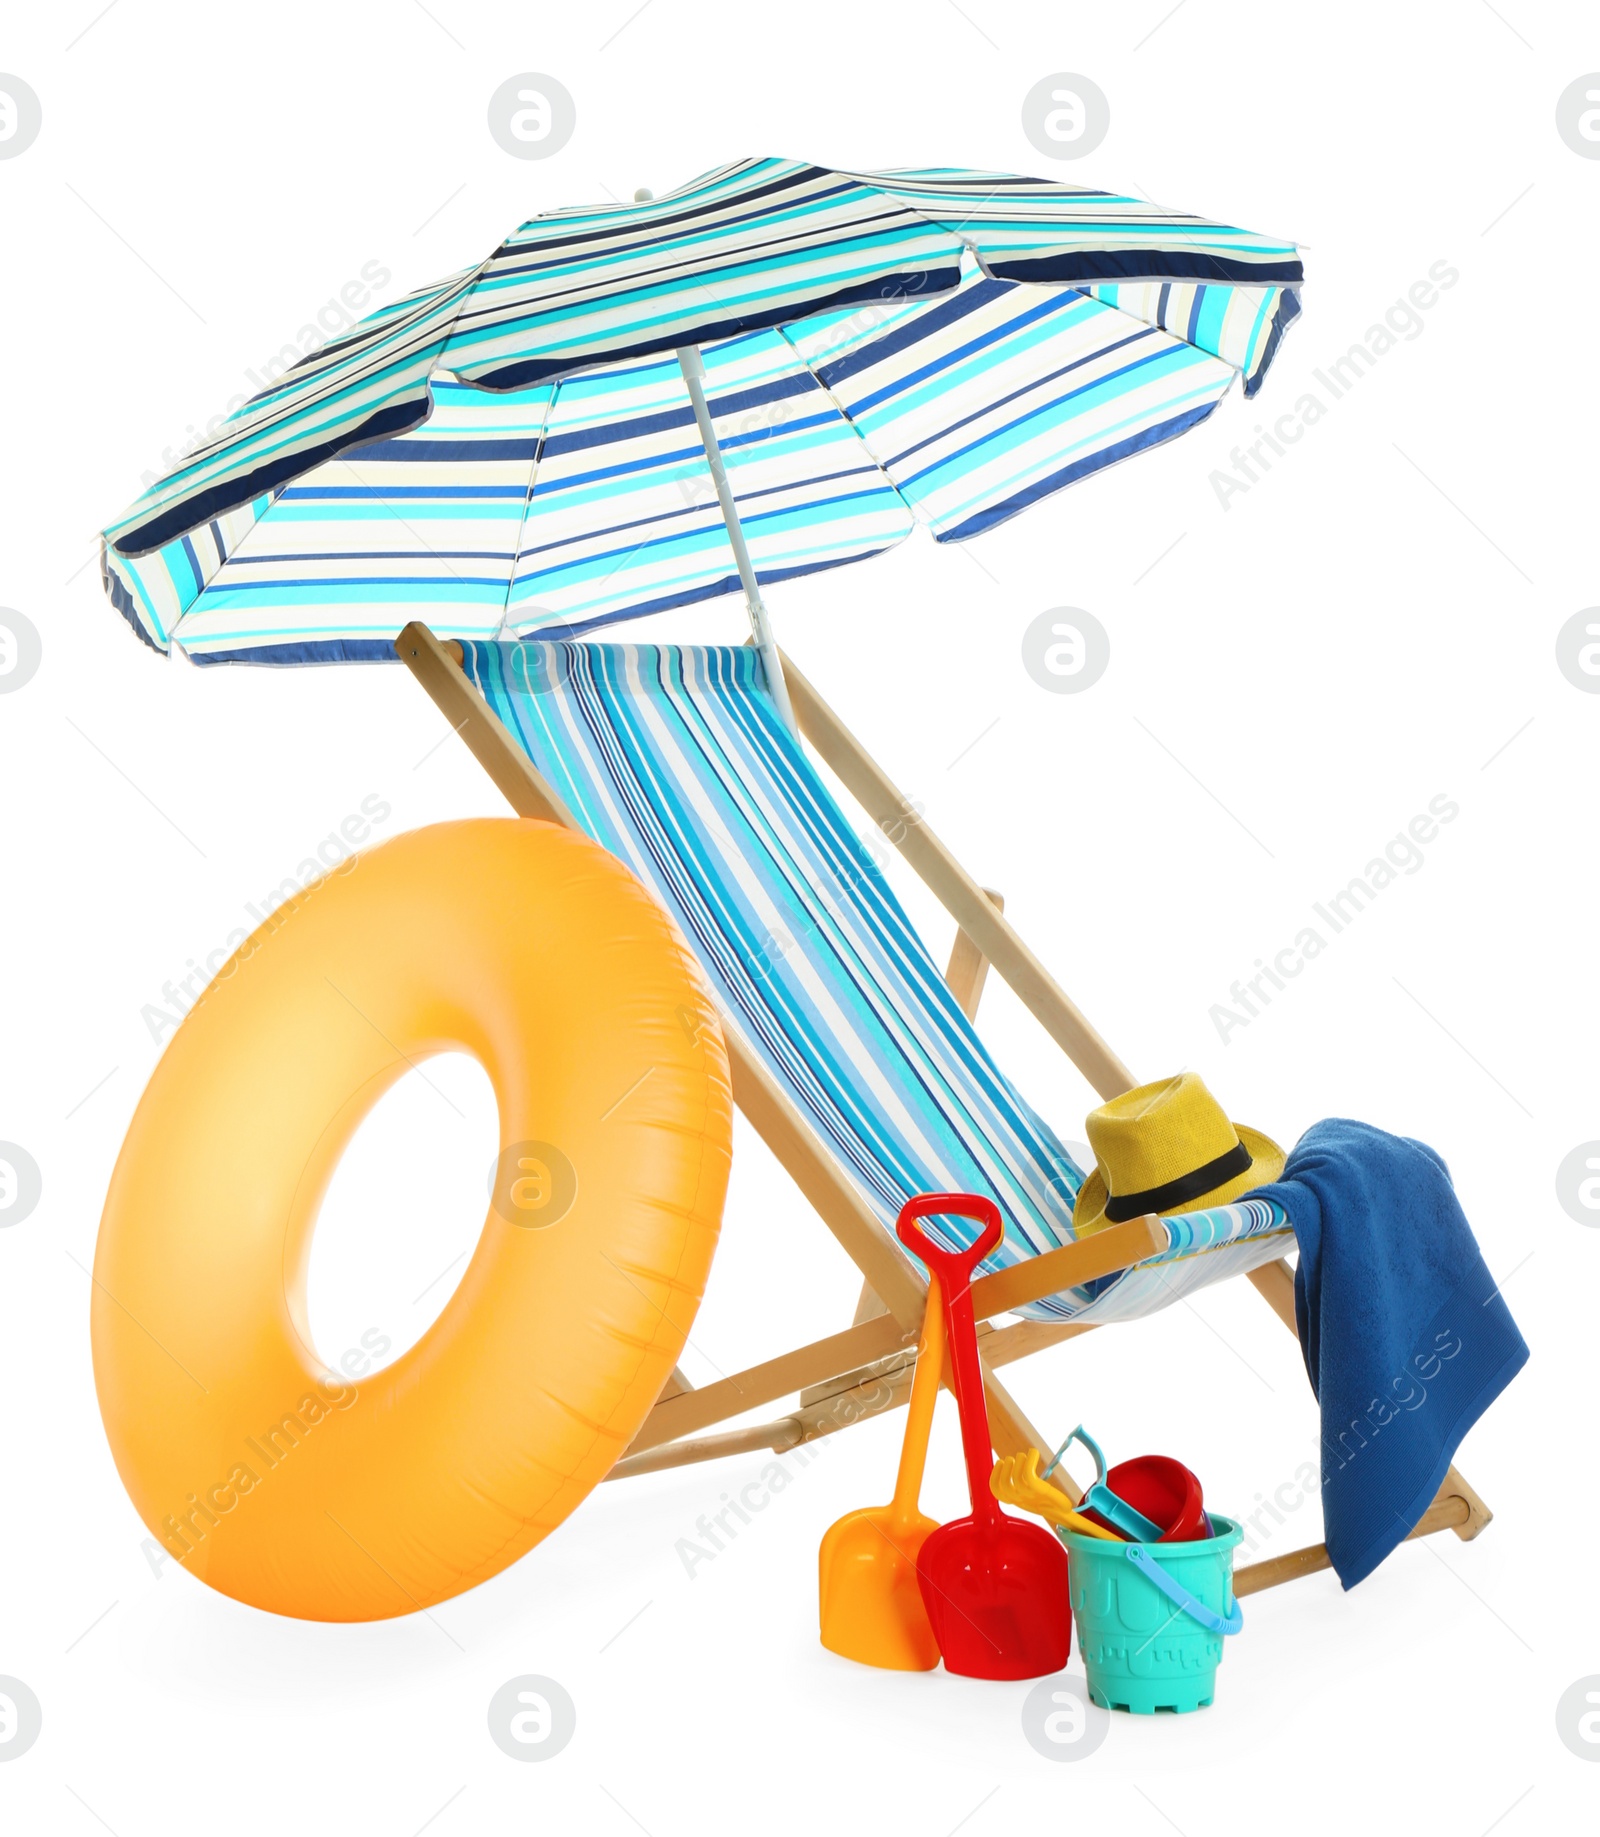 Photo of Beach umbrella, deck chair, inflatable ring, hat, towel and child's sand toys on white background